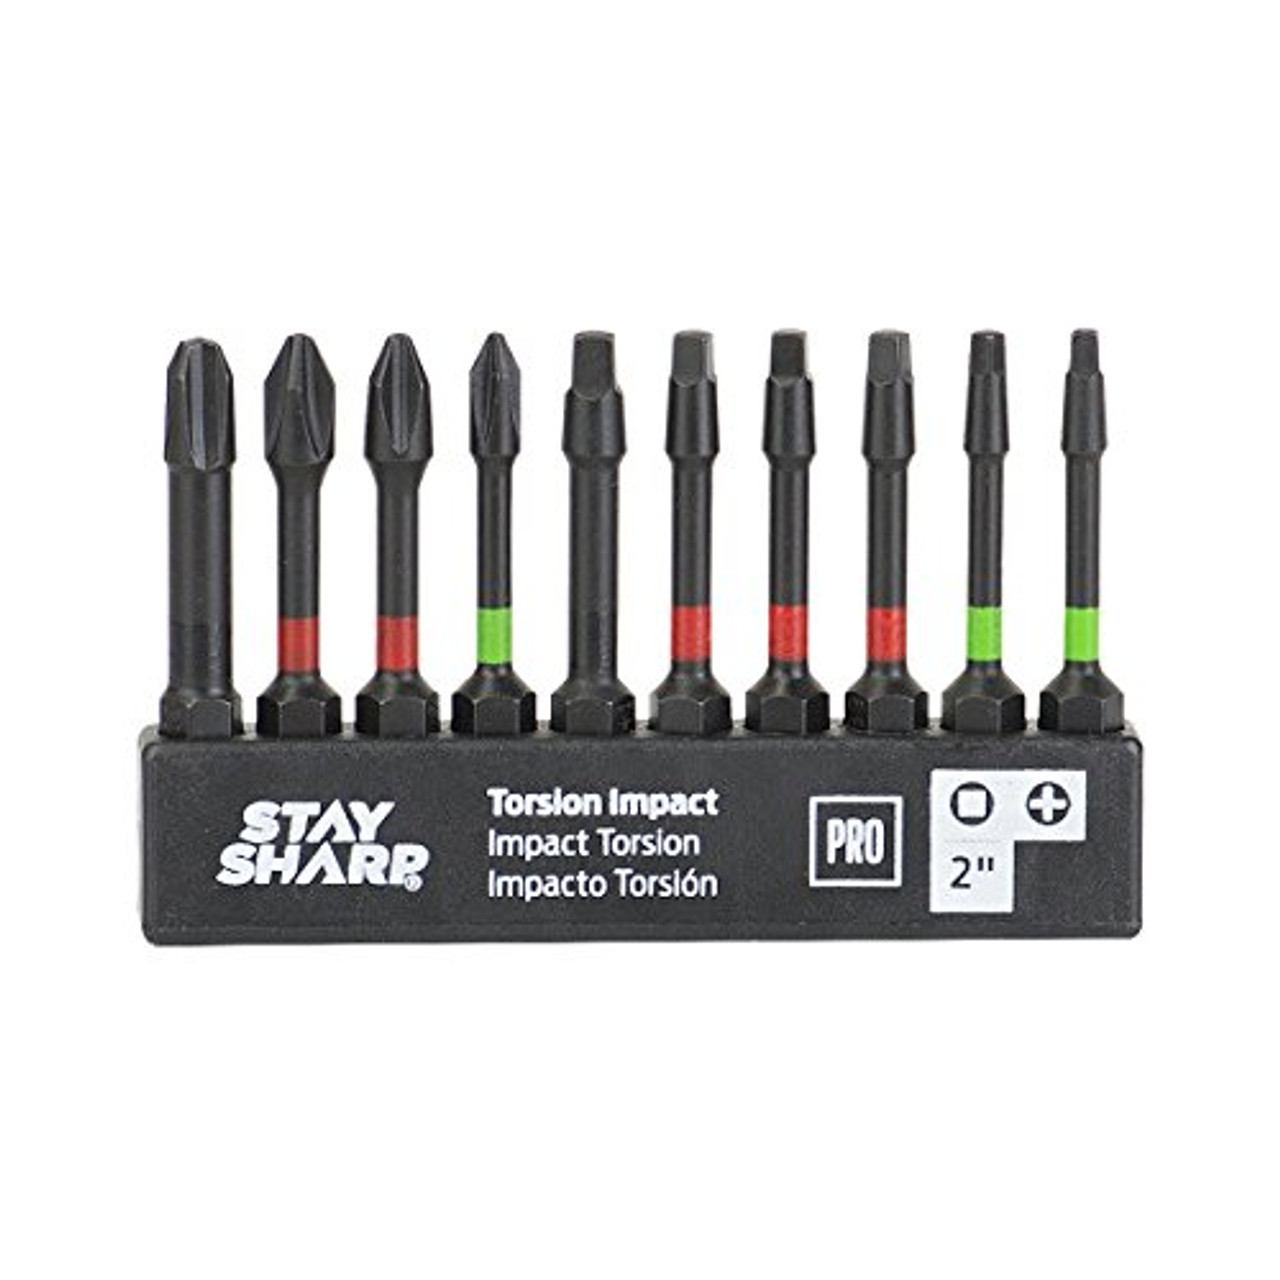 Stay Sharp 75330 2 in. Assorted Torsion Impact Bit Clip Square Recess Phillips Professional Screwdriver Bit - Recyclable - 10 Piece